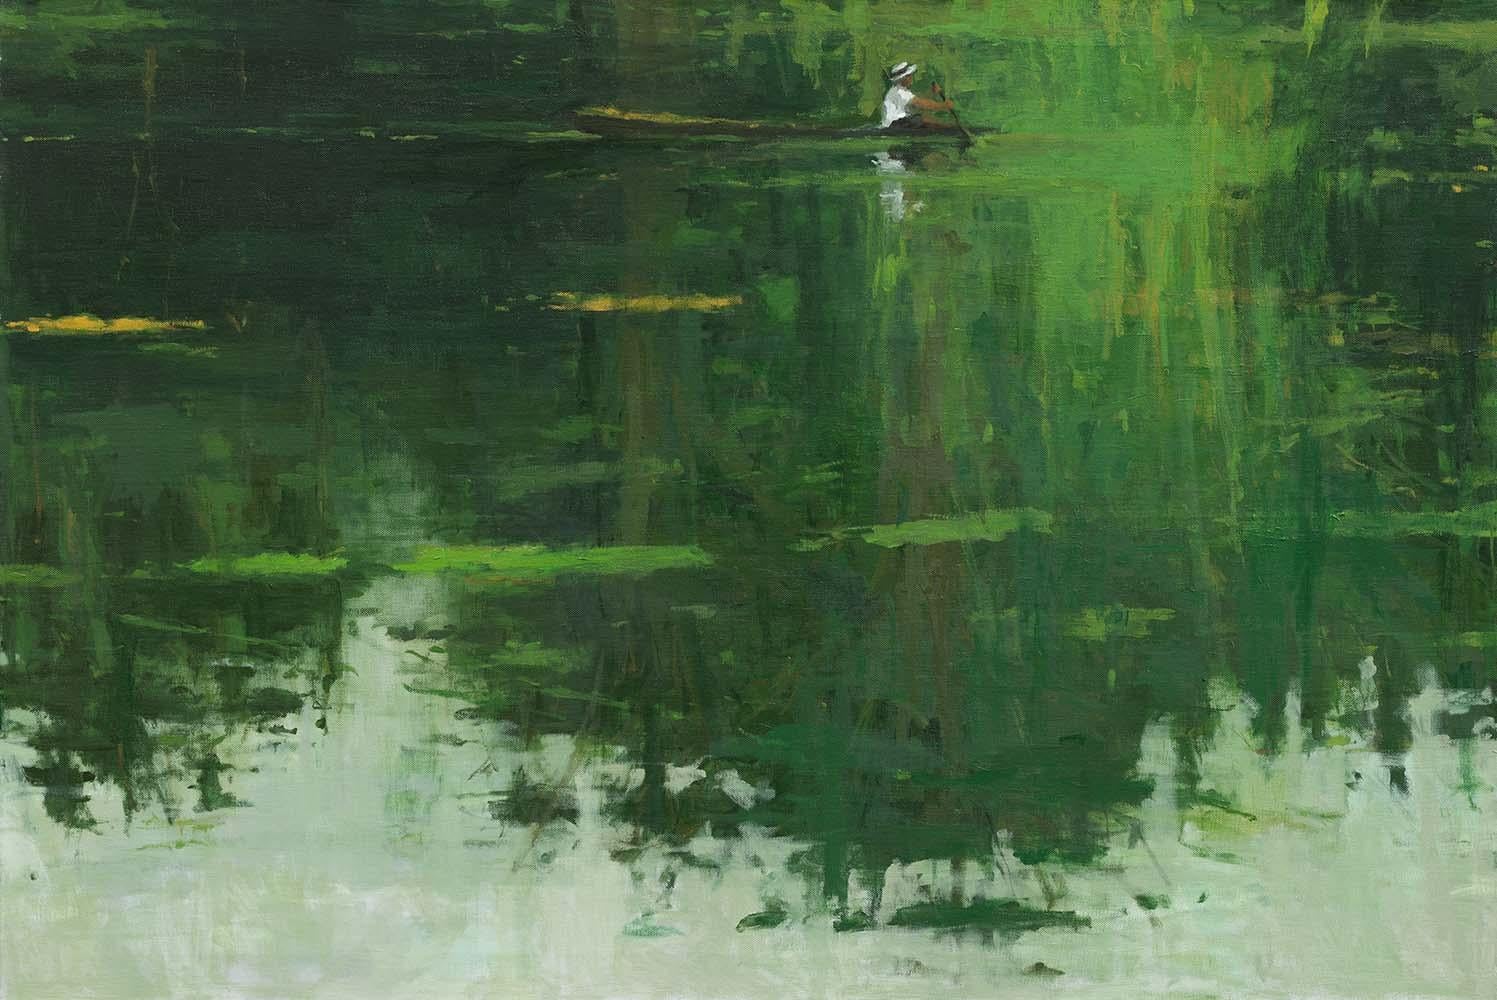 Reflection n°5, Jungle series - Large Waterscape Painting